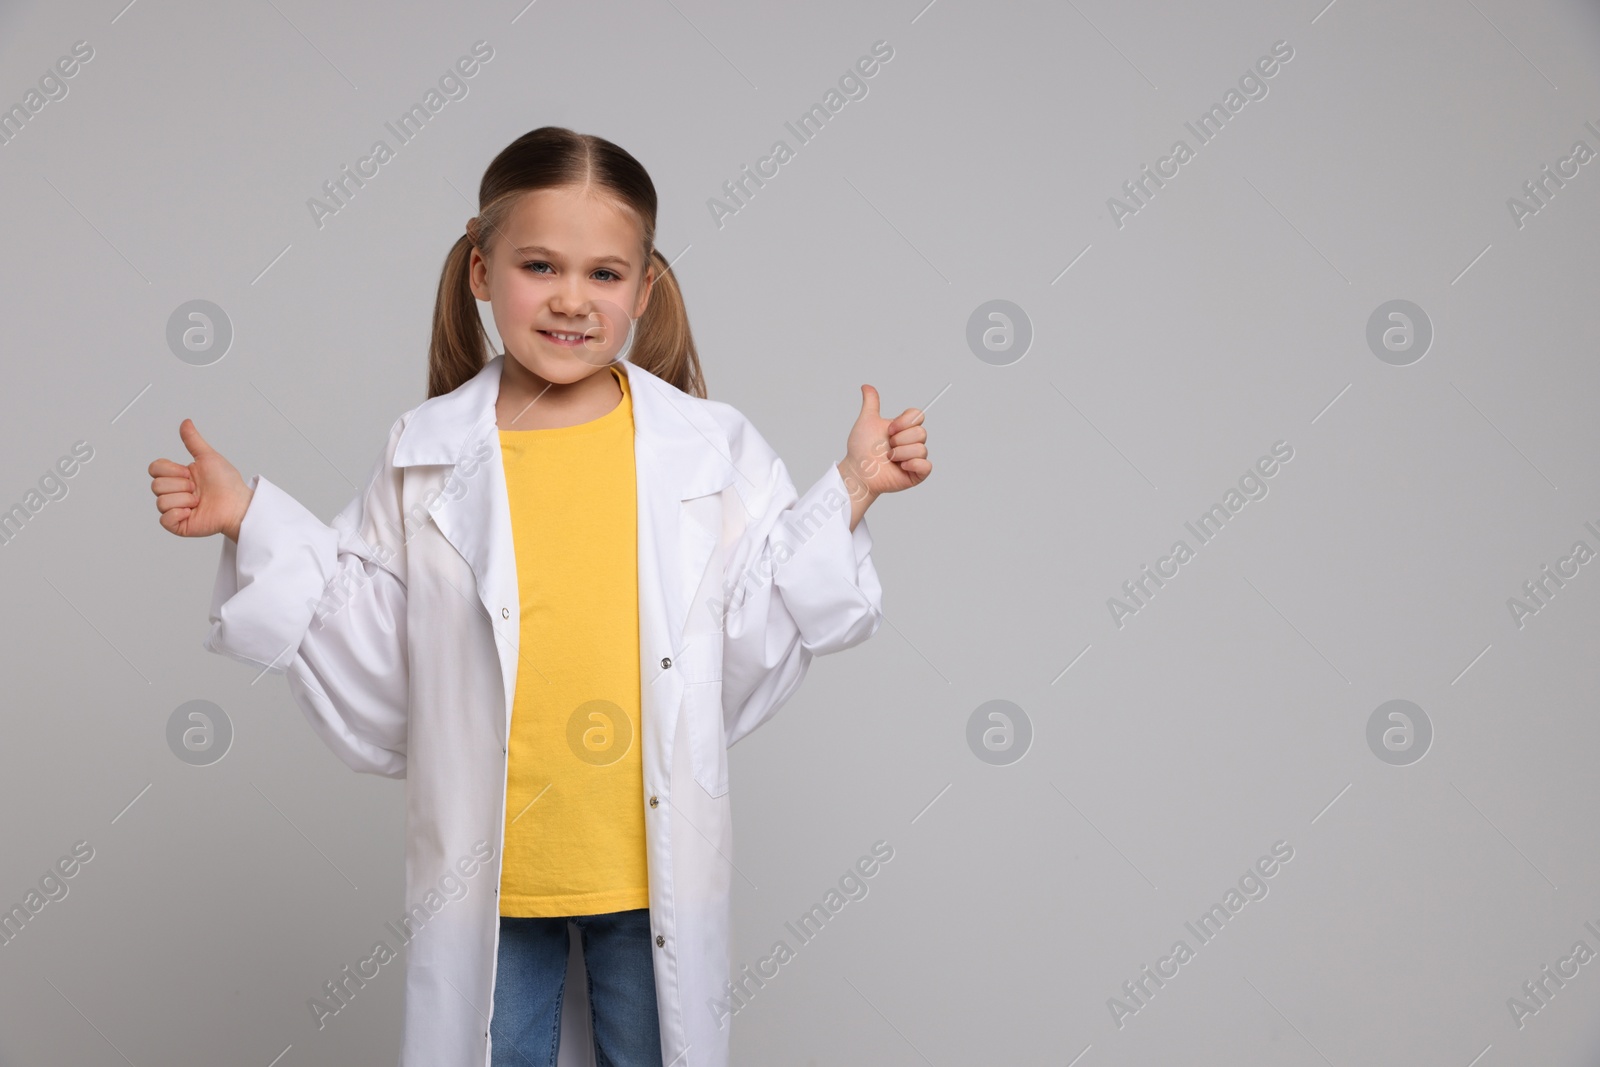 Photo of Little girl in medical uniform showing thumbs up on light grey background. Space for text